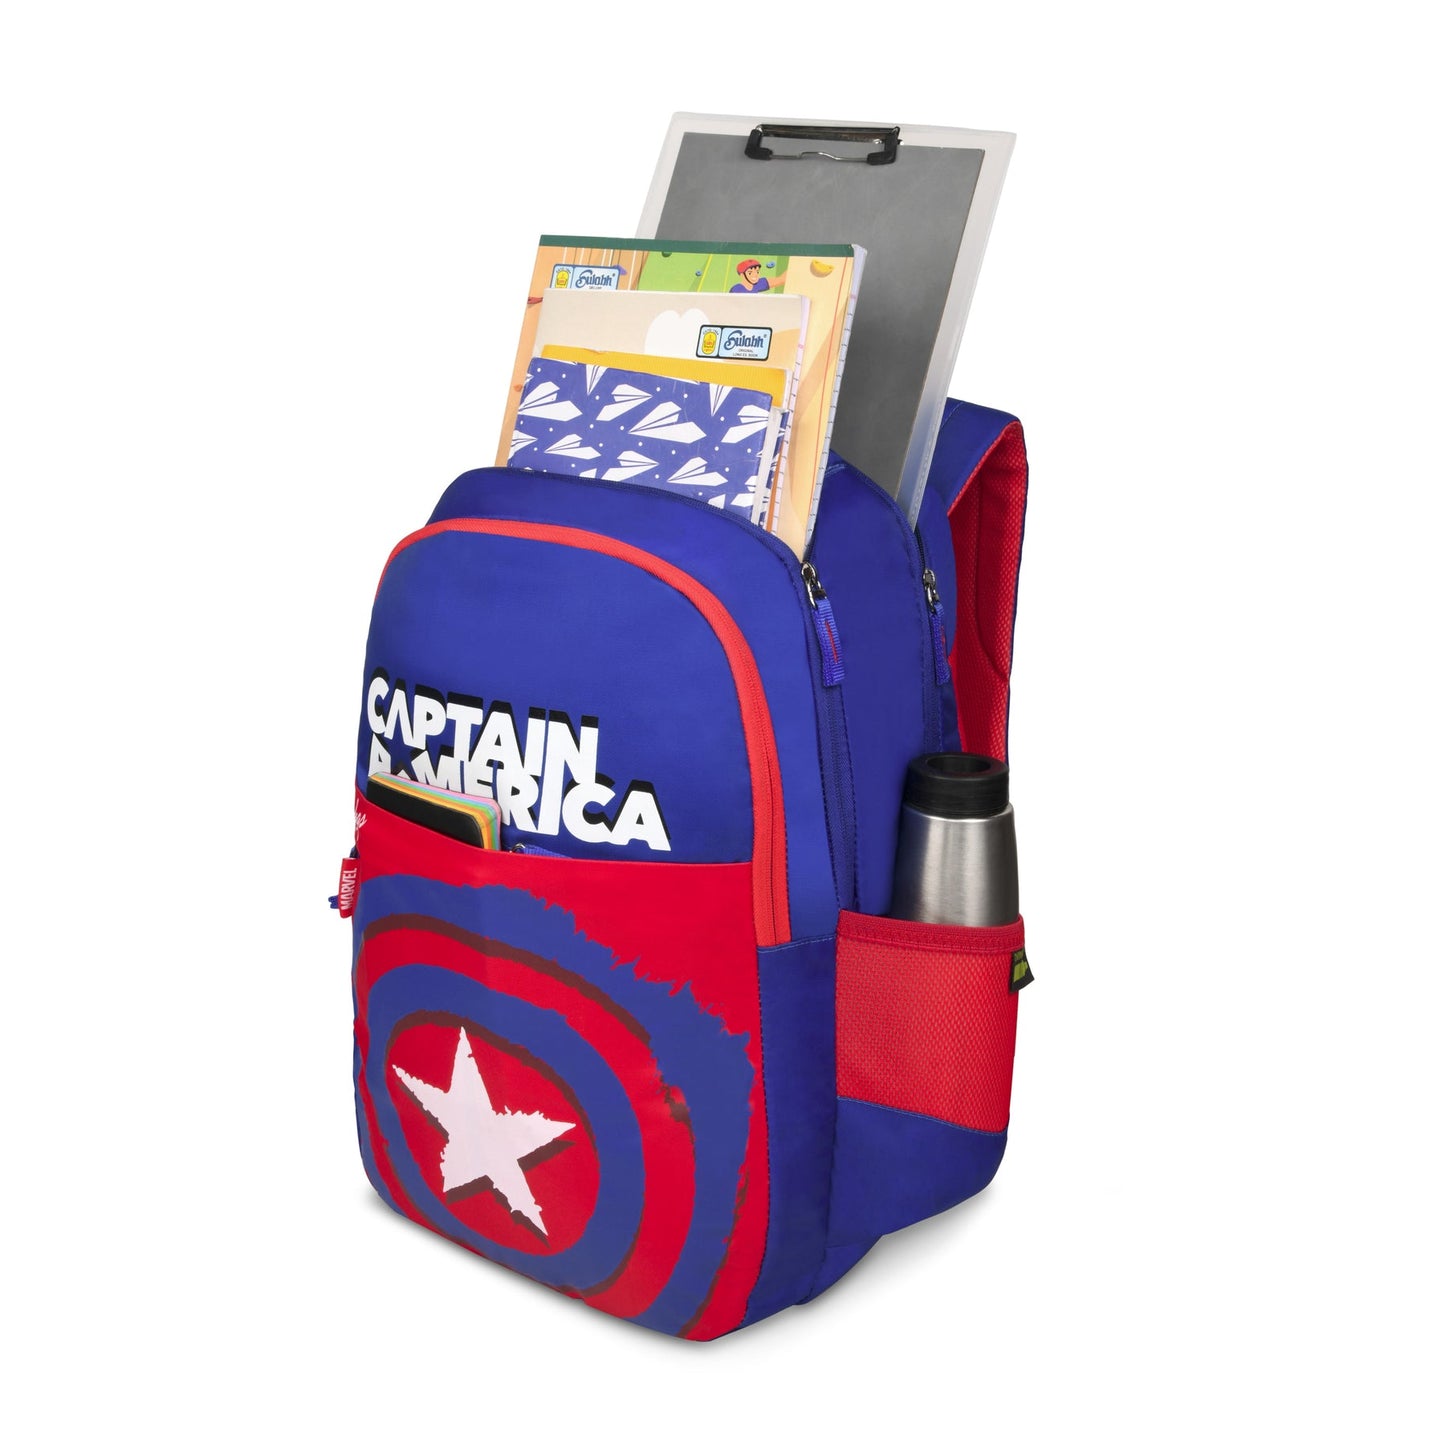 Skybags Marvel Captain America 03 25L Backpack